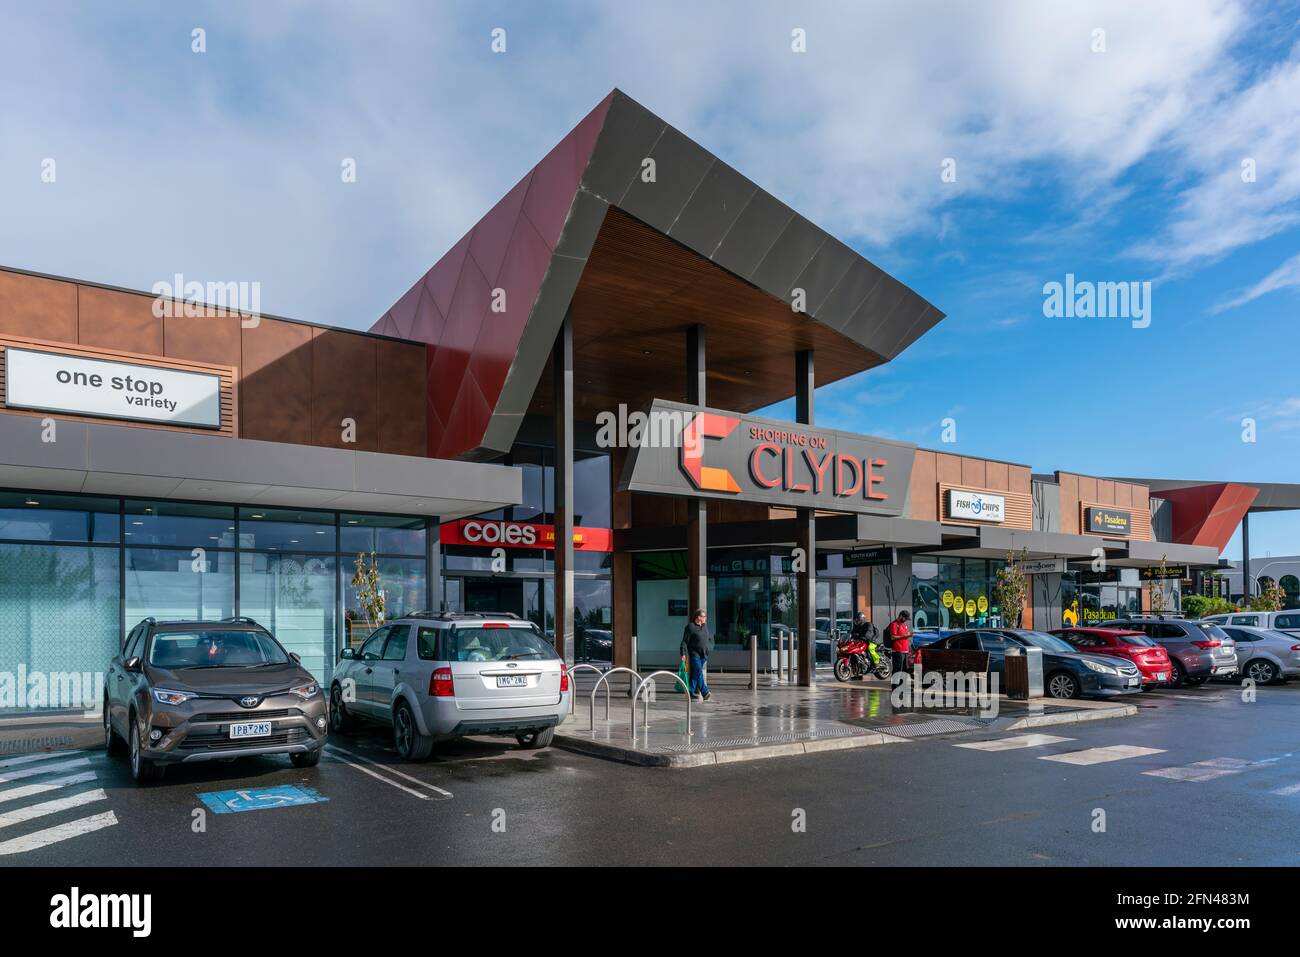 External view of Clyde shopping centre in Melbourne, Australia Stock Photo